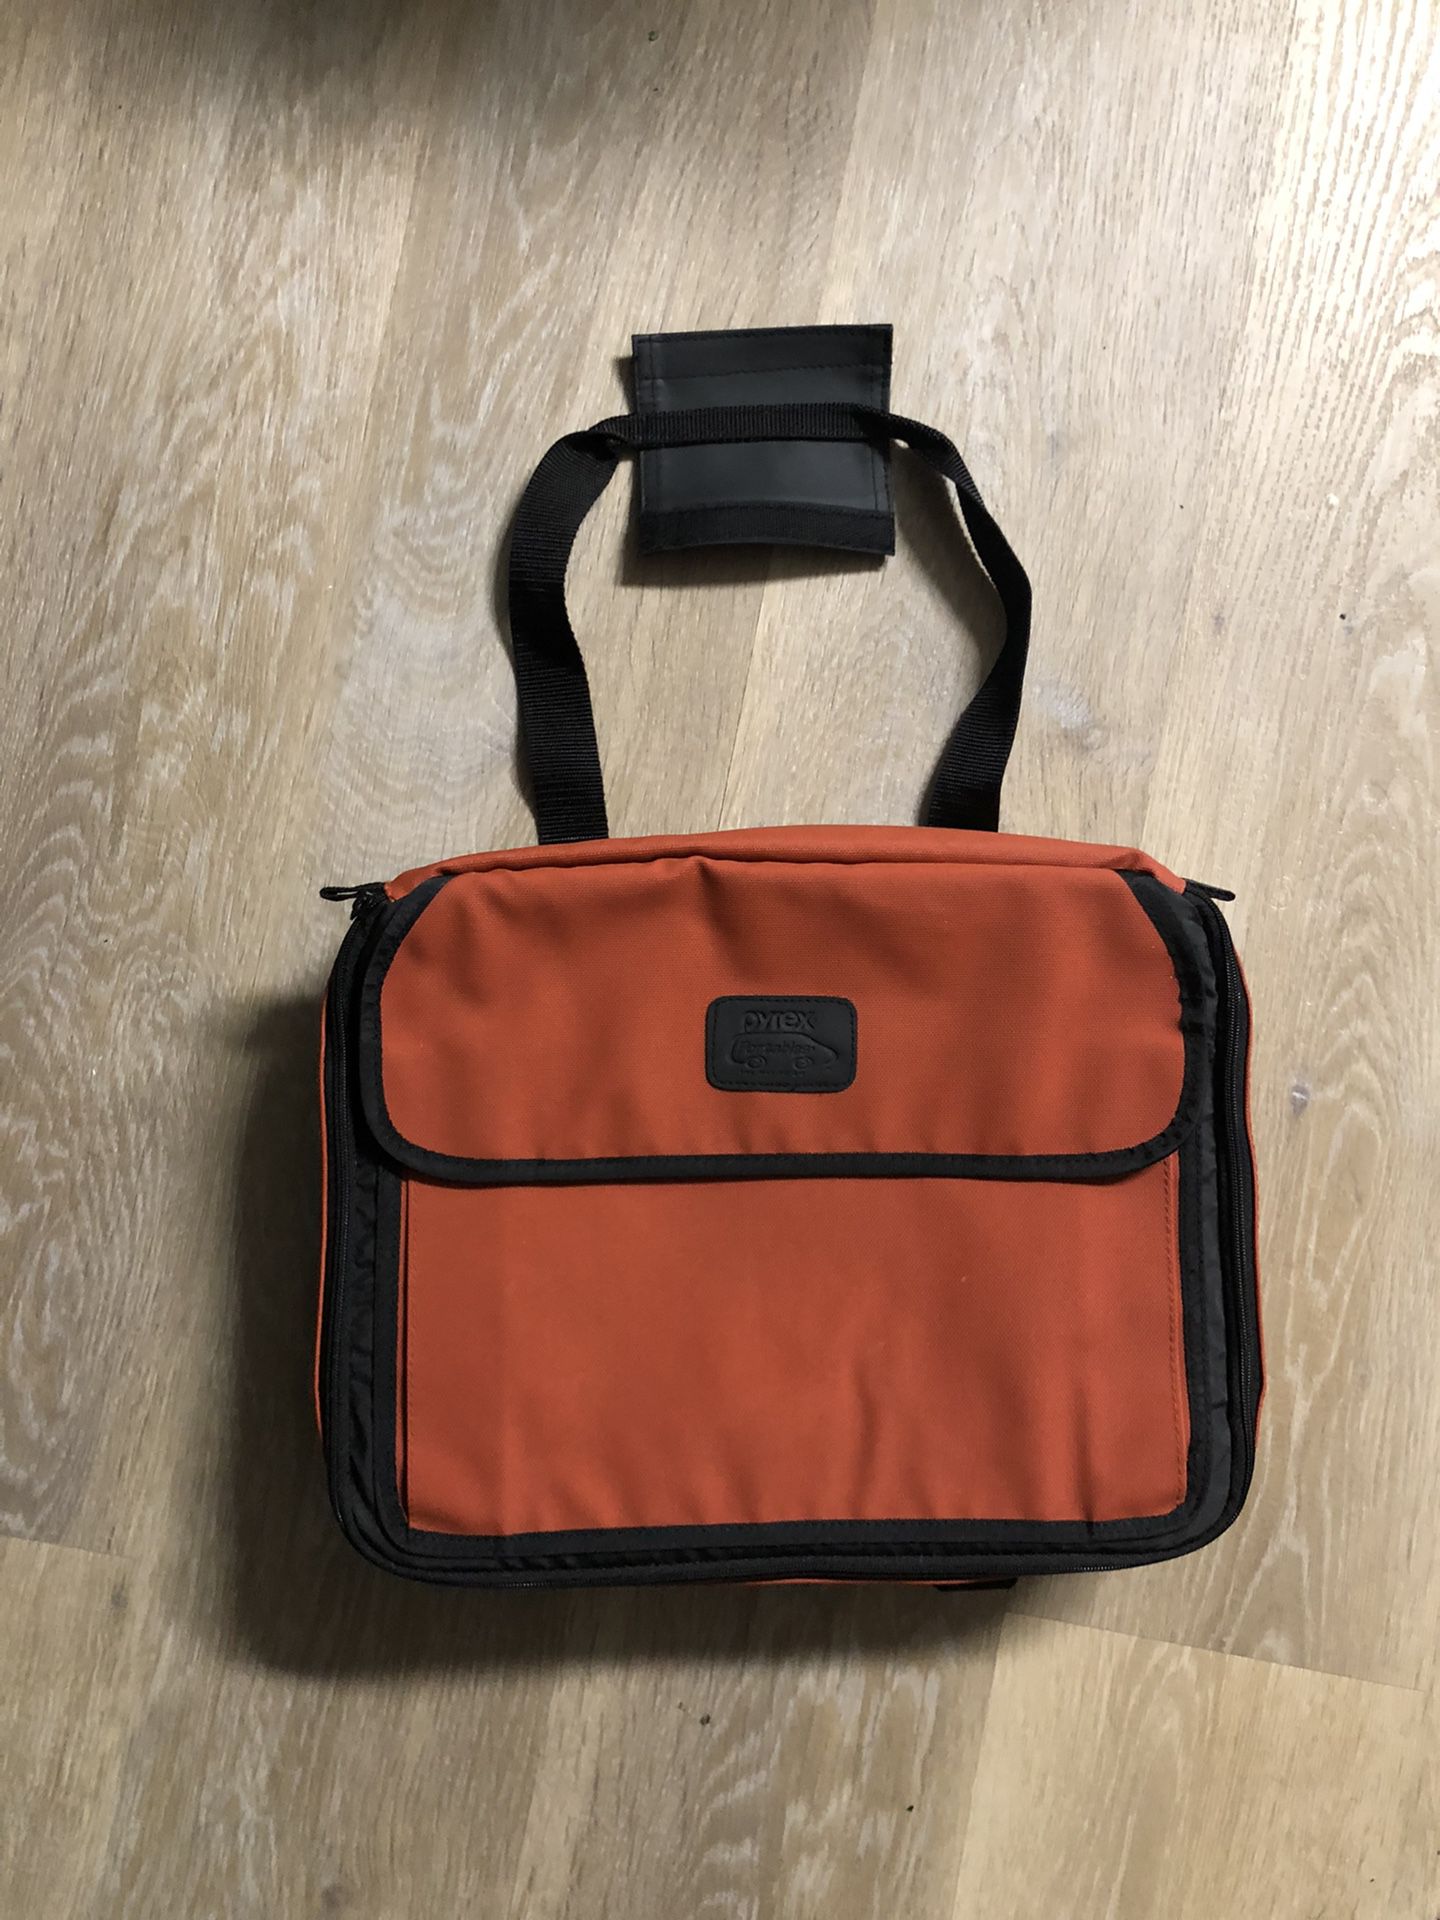 Laptop Bags, Backpacks, Lunchboxes And More!!